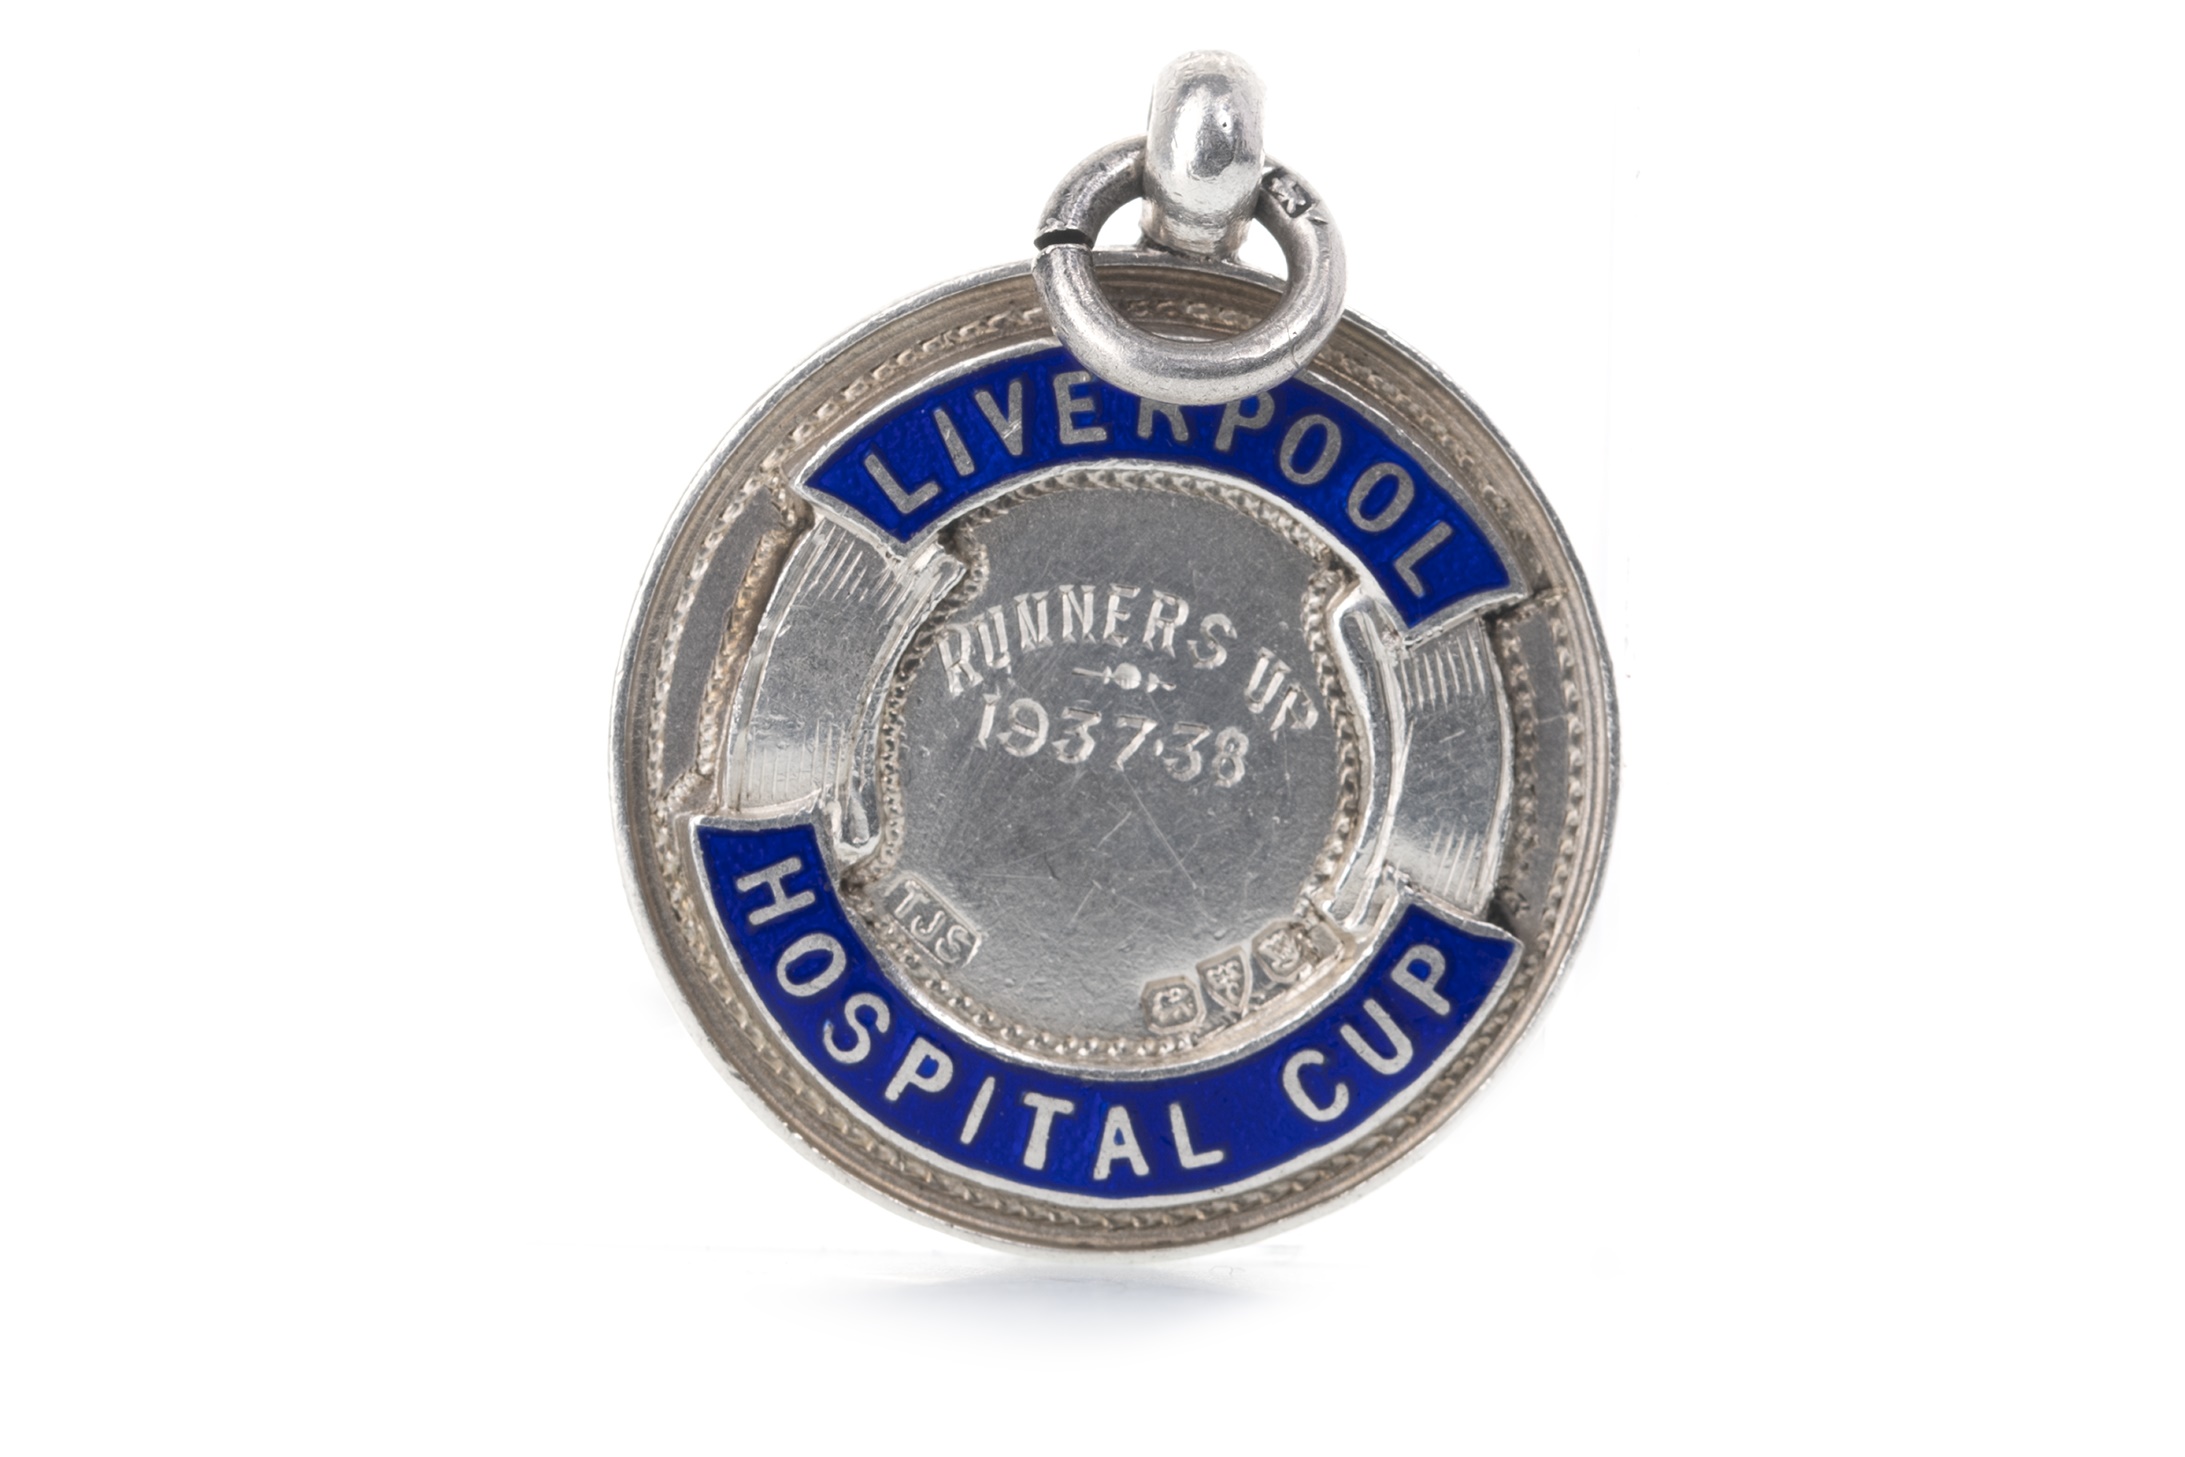 A LIVERPOOL HOSPITAL CUP SILVER MEDAL 1938